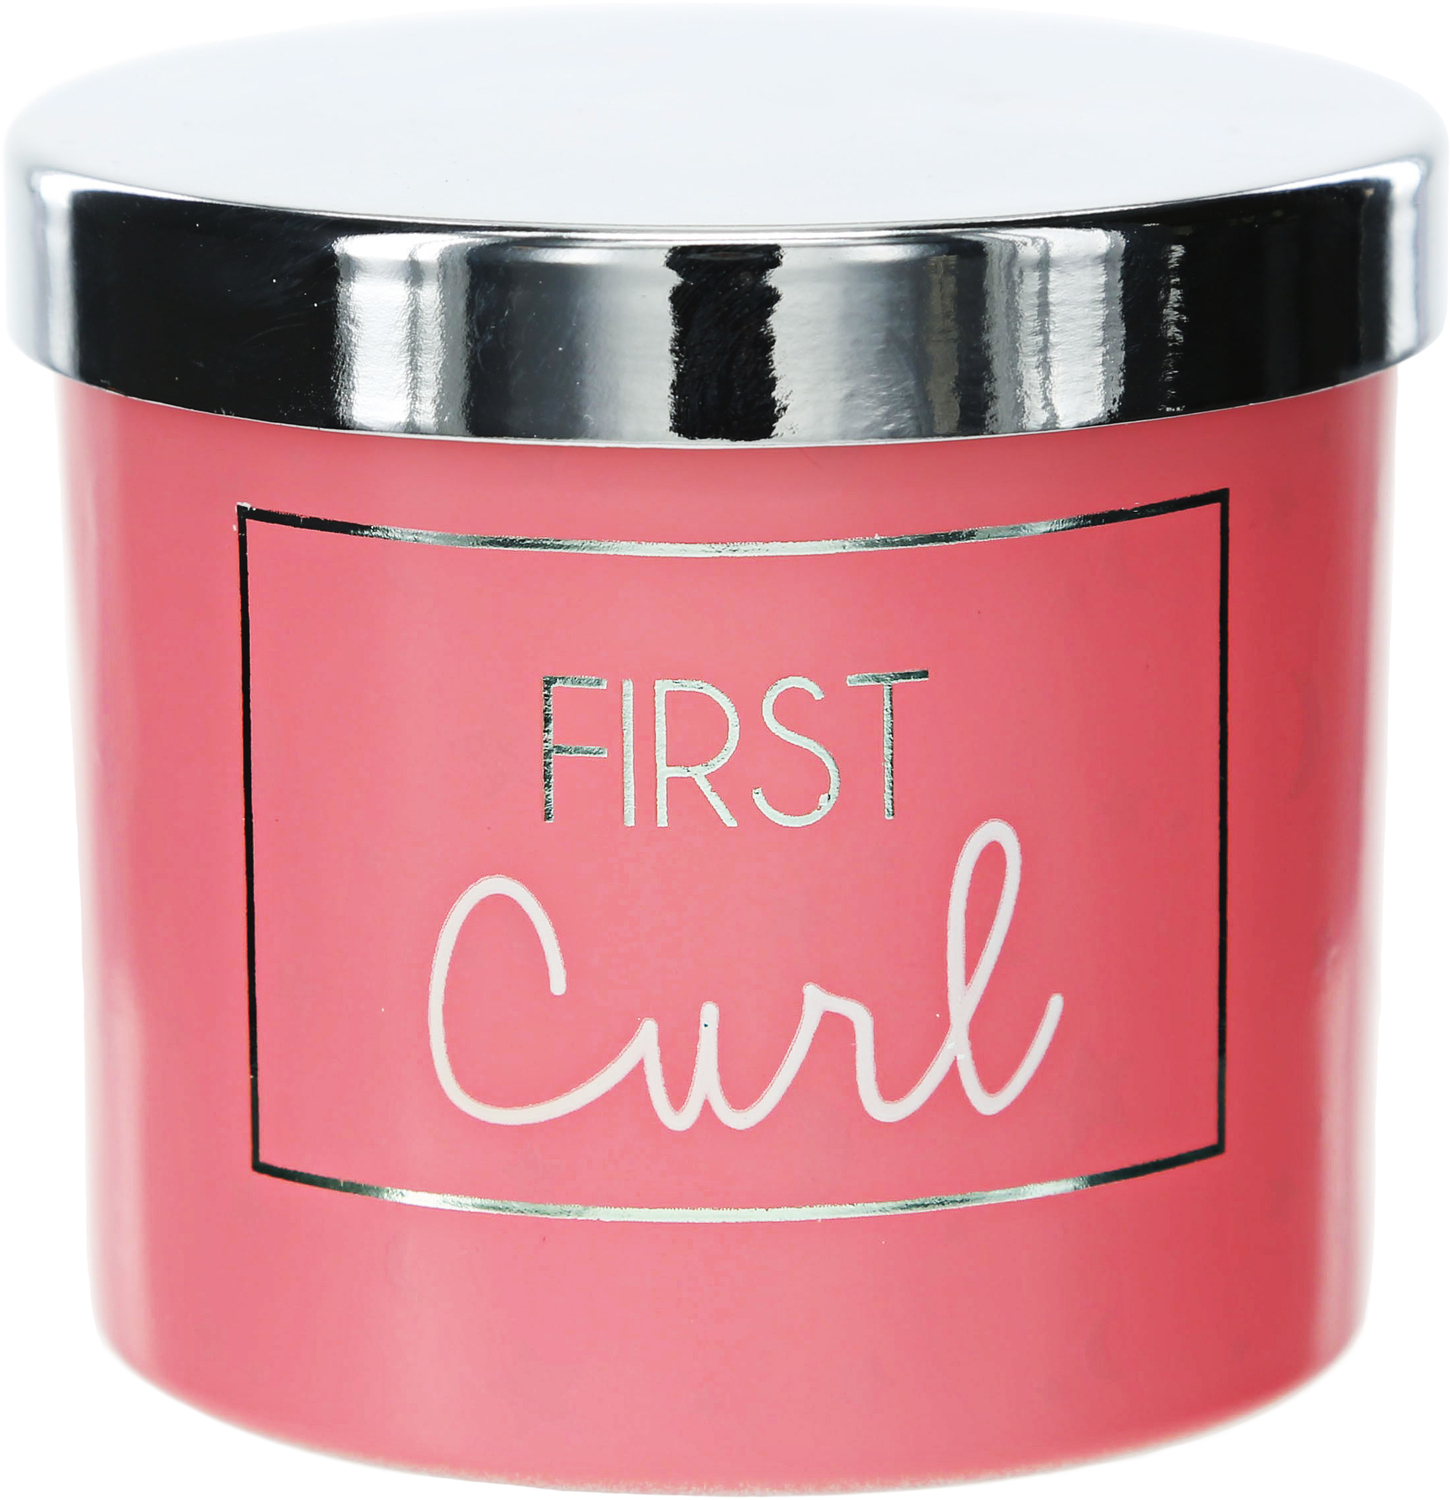 First Curl Pink by Happy Occasions - First Curl Pink - 2.5" Glass Memory Box